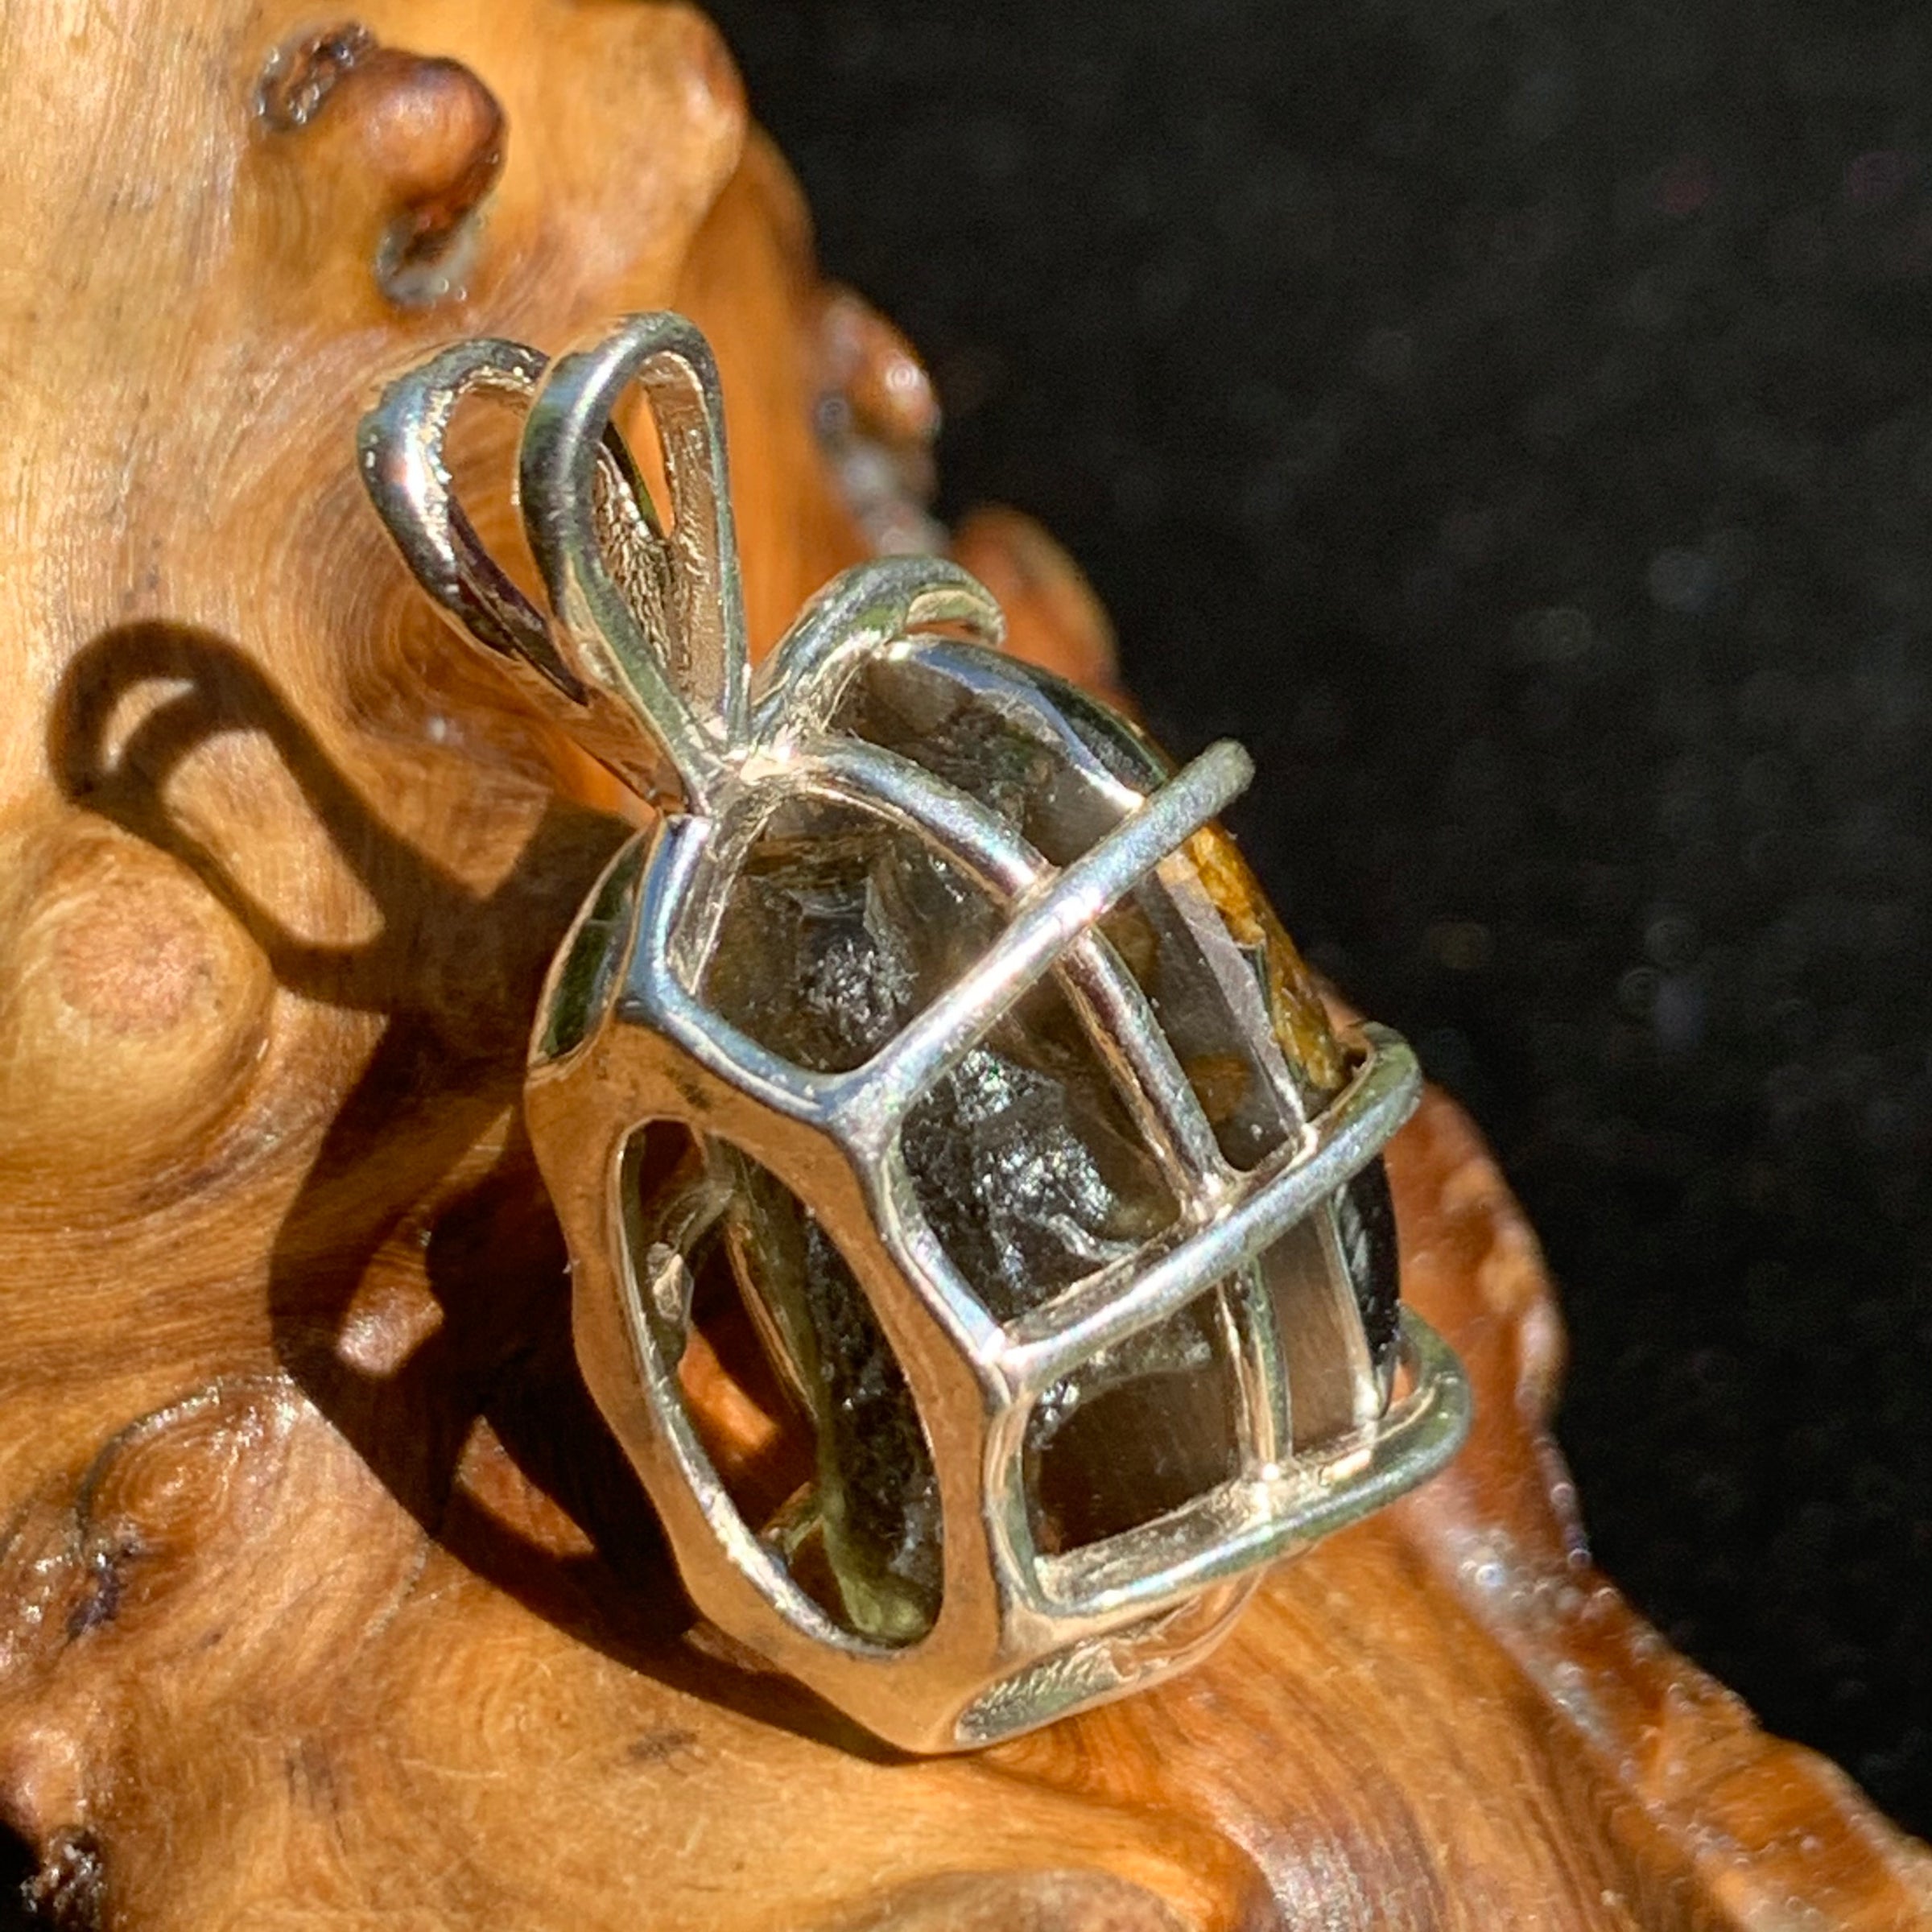 moldavite showing through the backside of a sterling silver sericho pallasite meteorite and raw moldavite tektite basket pendant sitting on driftwood for display